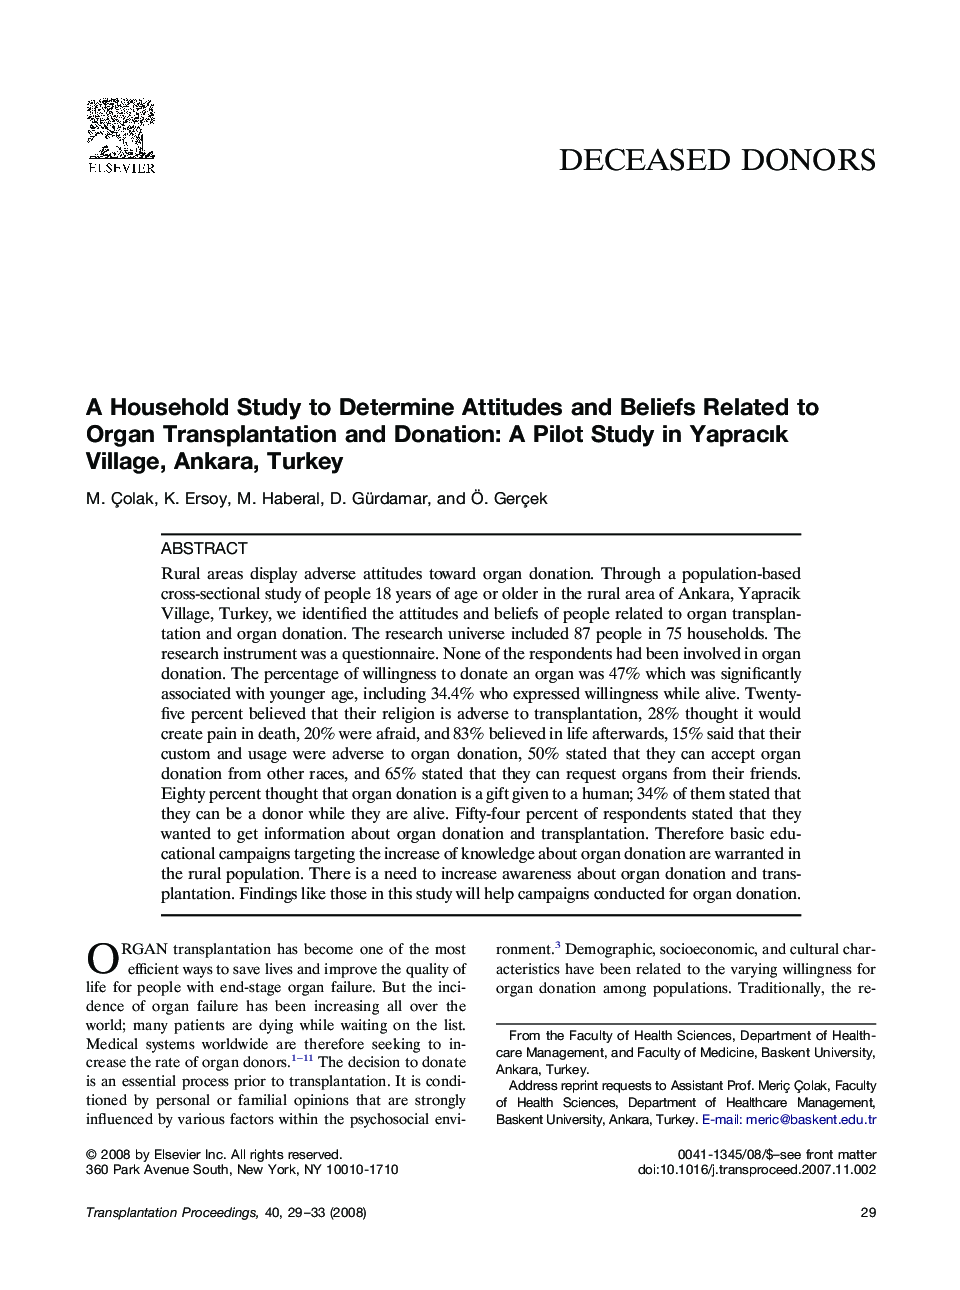 A Household Study to Determine Attitudes and Beliefs Related to Organ Transplantation and Donation: A Pilot Study in Yapracık Village, Ankara, Turkey